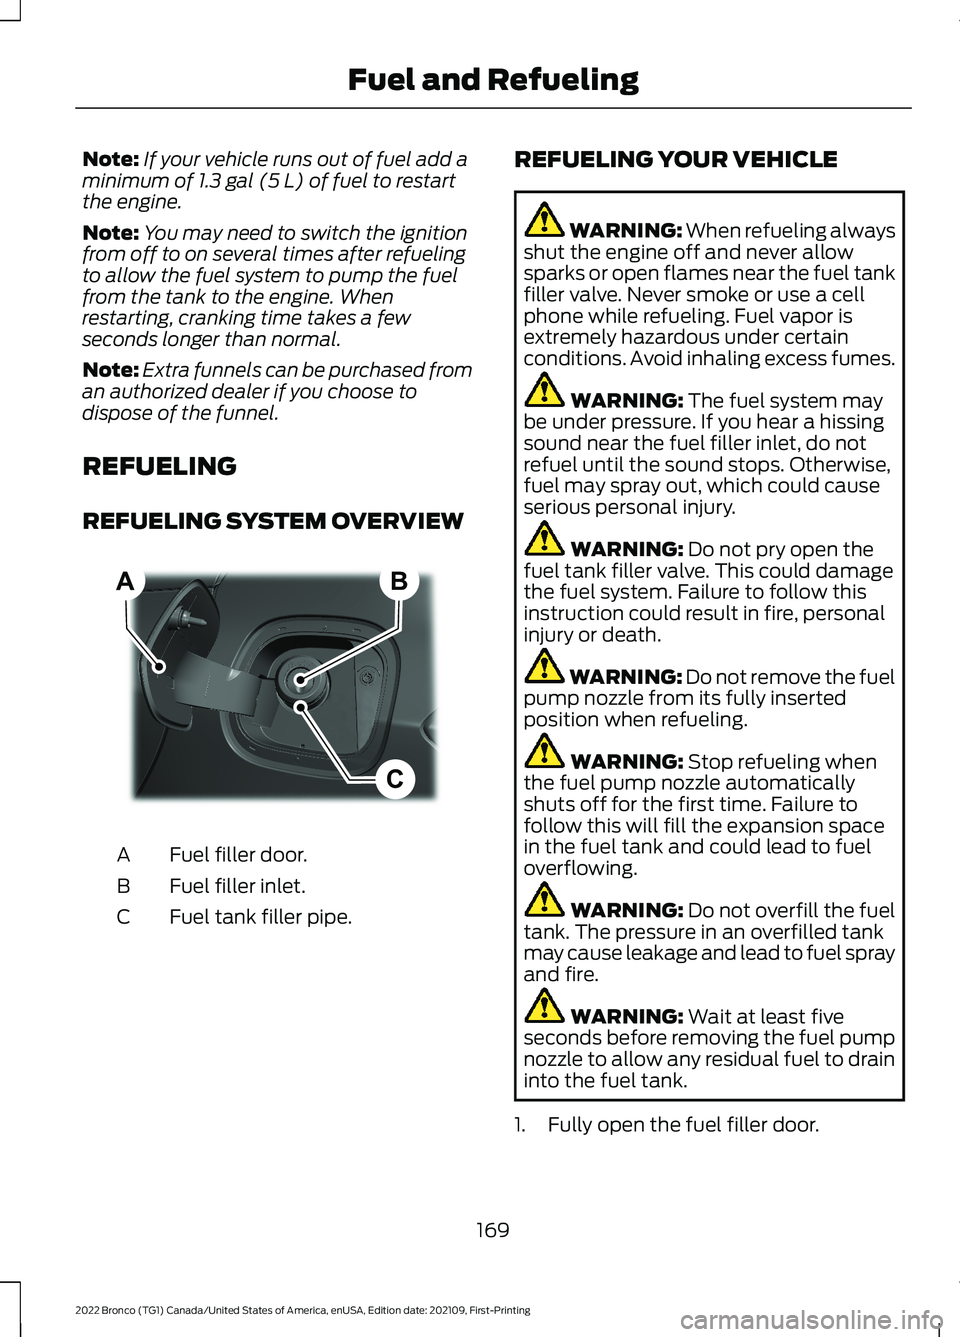 FORD BRONCO 2022  Owners Manual Note:If your vehicle runs out of fuel add aminimum of 1.3 gal (5 L) of fuel to restartthe engine.
Note:You may need to switch the ignitionfrom off to on several times after refuelingto allow the fuel 